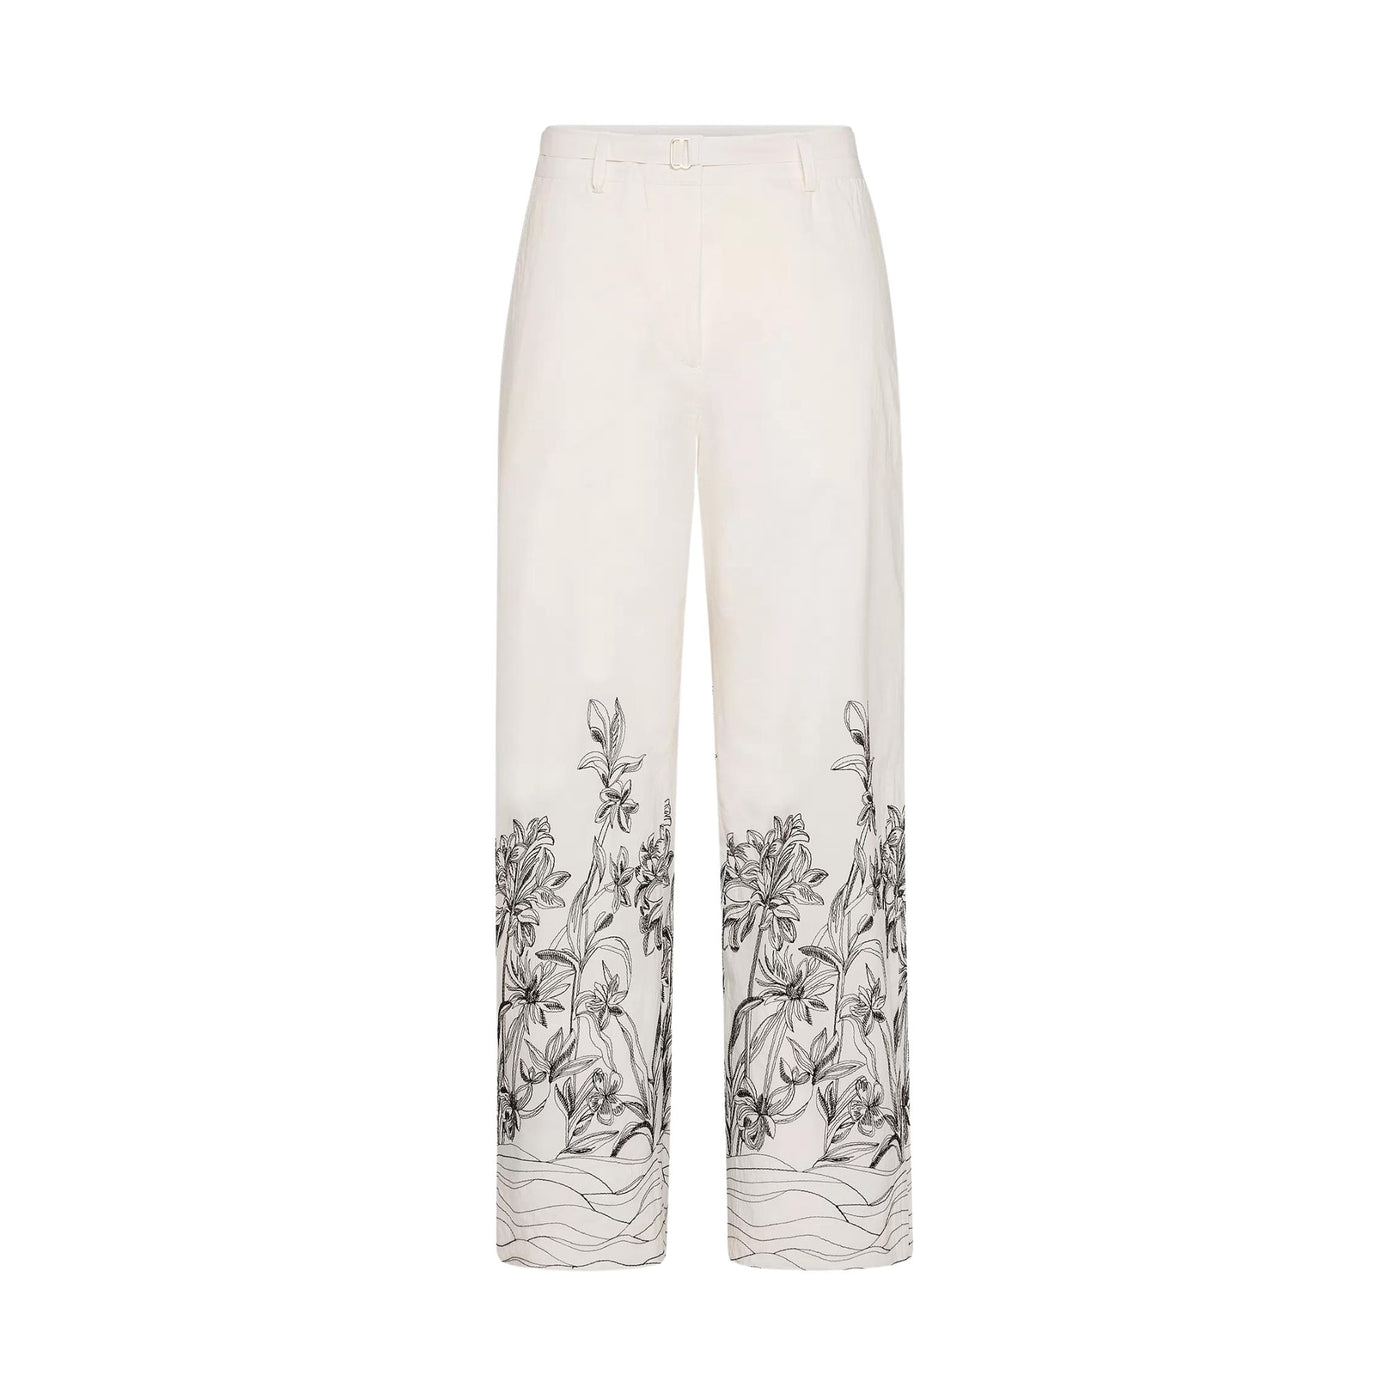 Women's trousers with black flower embroidery